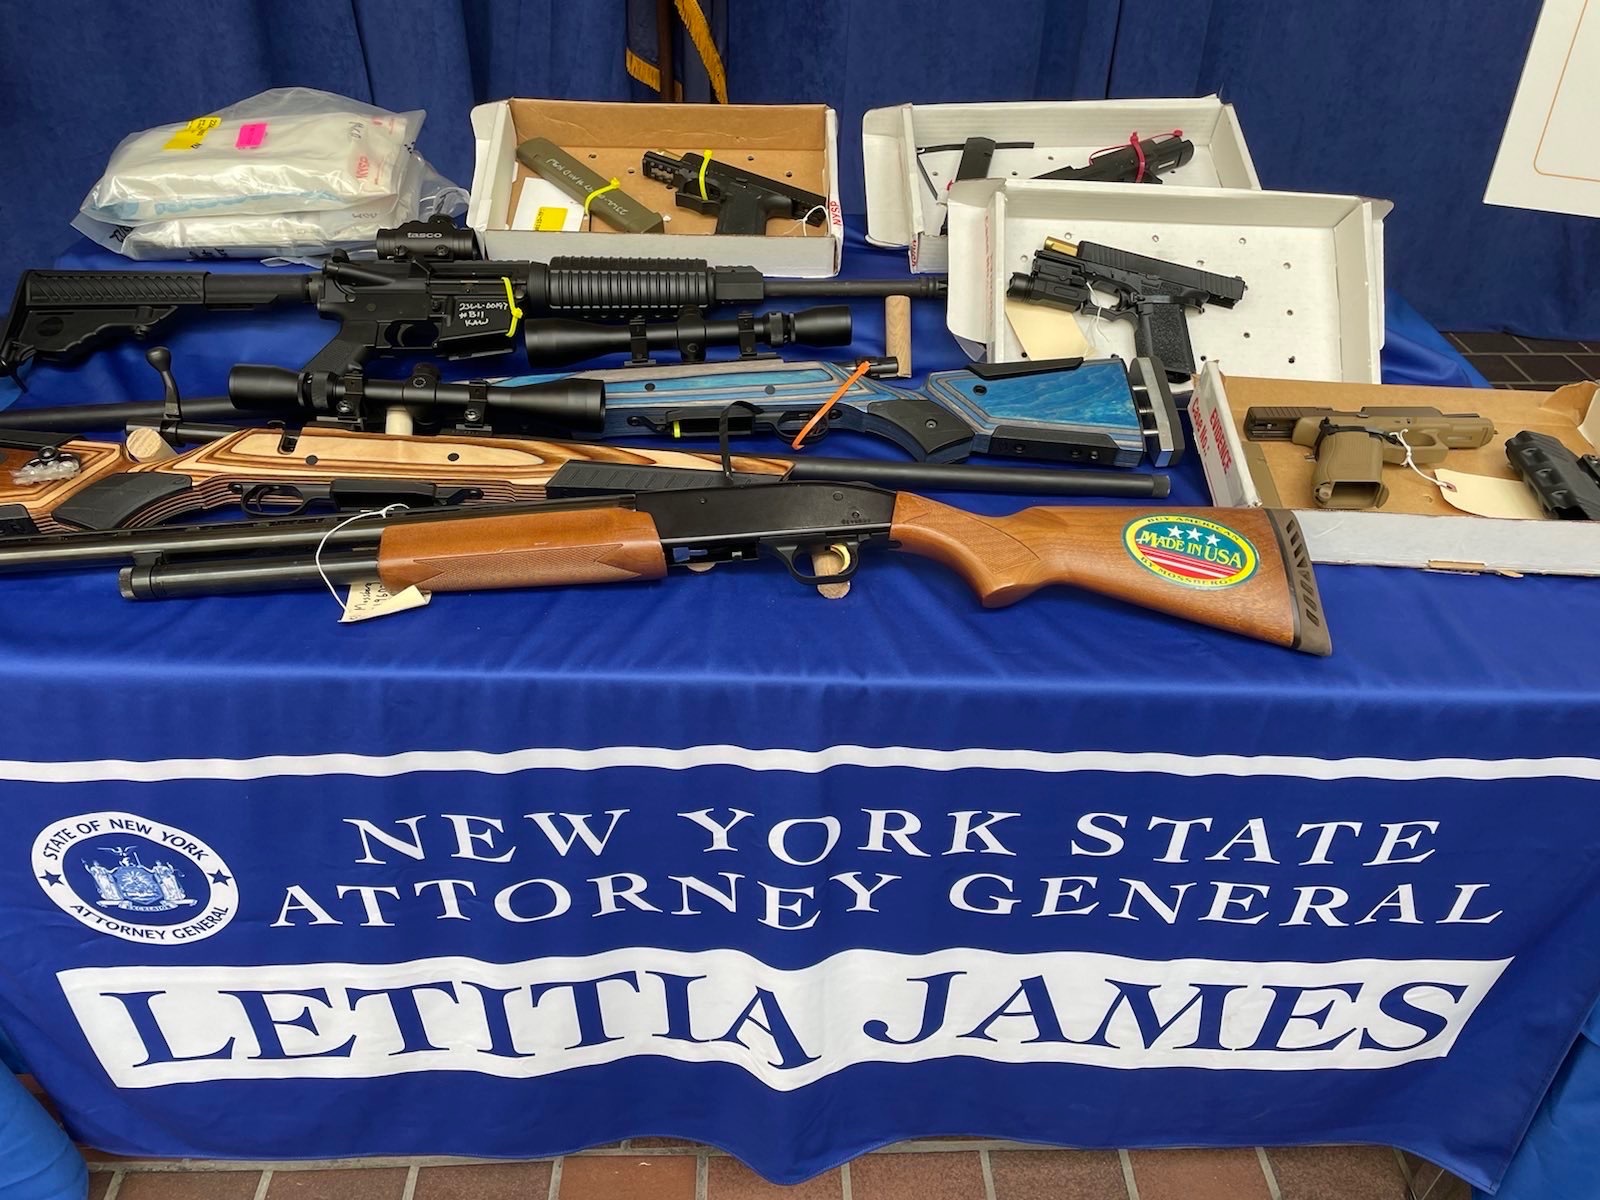 Attorney General James Announces Takedown Of Major Narcotics Trafficking Ring In Finger Lakes Region